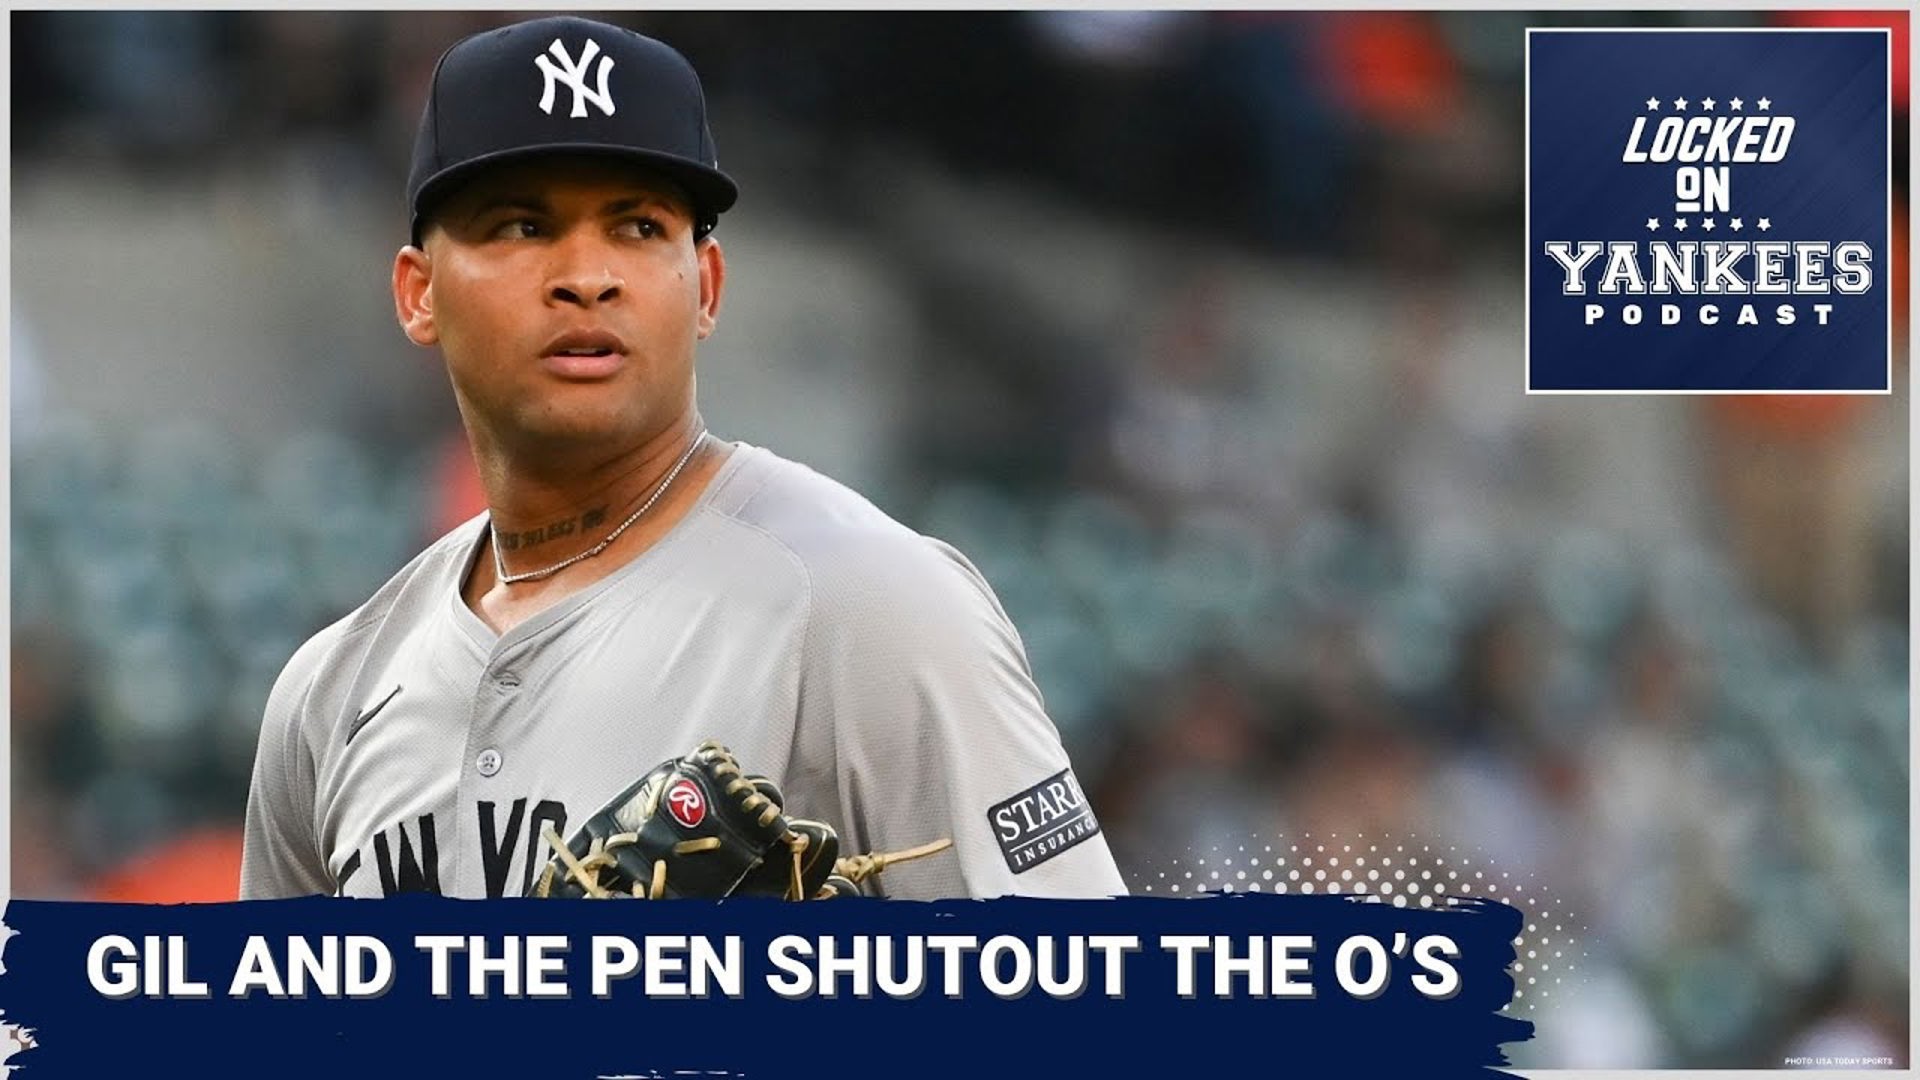 The New York Yankees beat the Baltimore Orioles, 2-0 on Wednesday night, behind a strong pitching performance from Luis Gil.